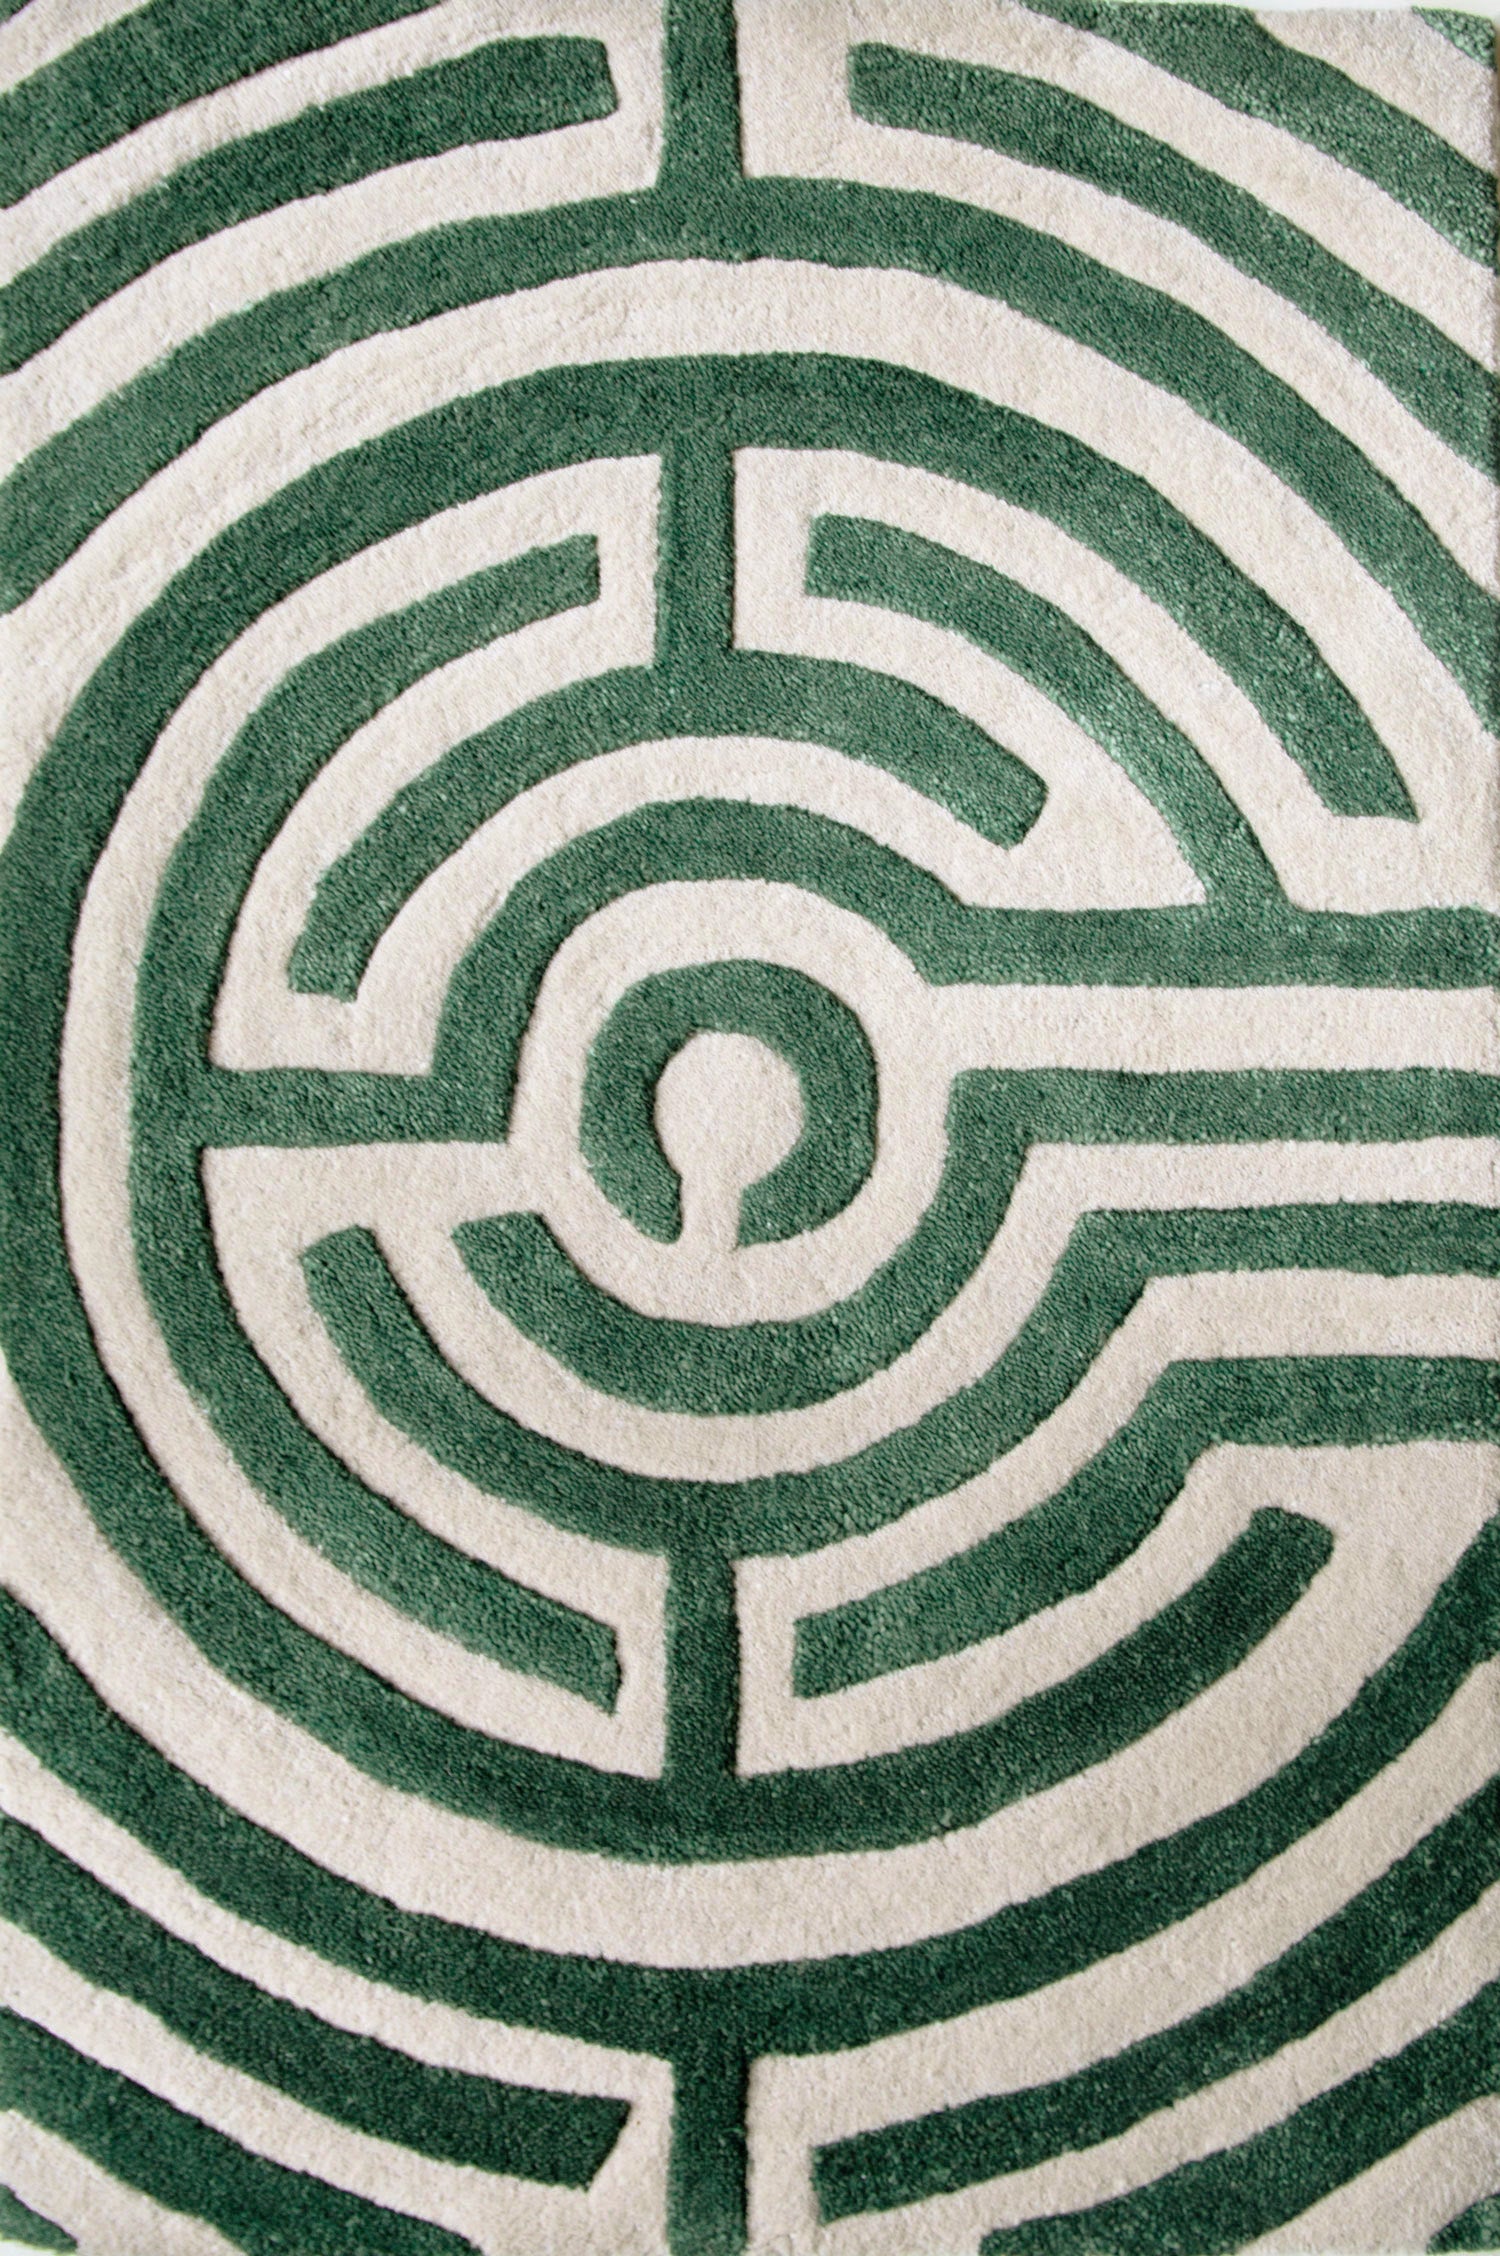 Maze luxury floor rug with a green border outlining a beige maze